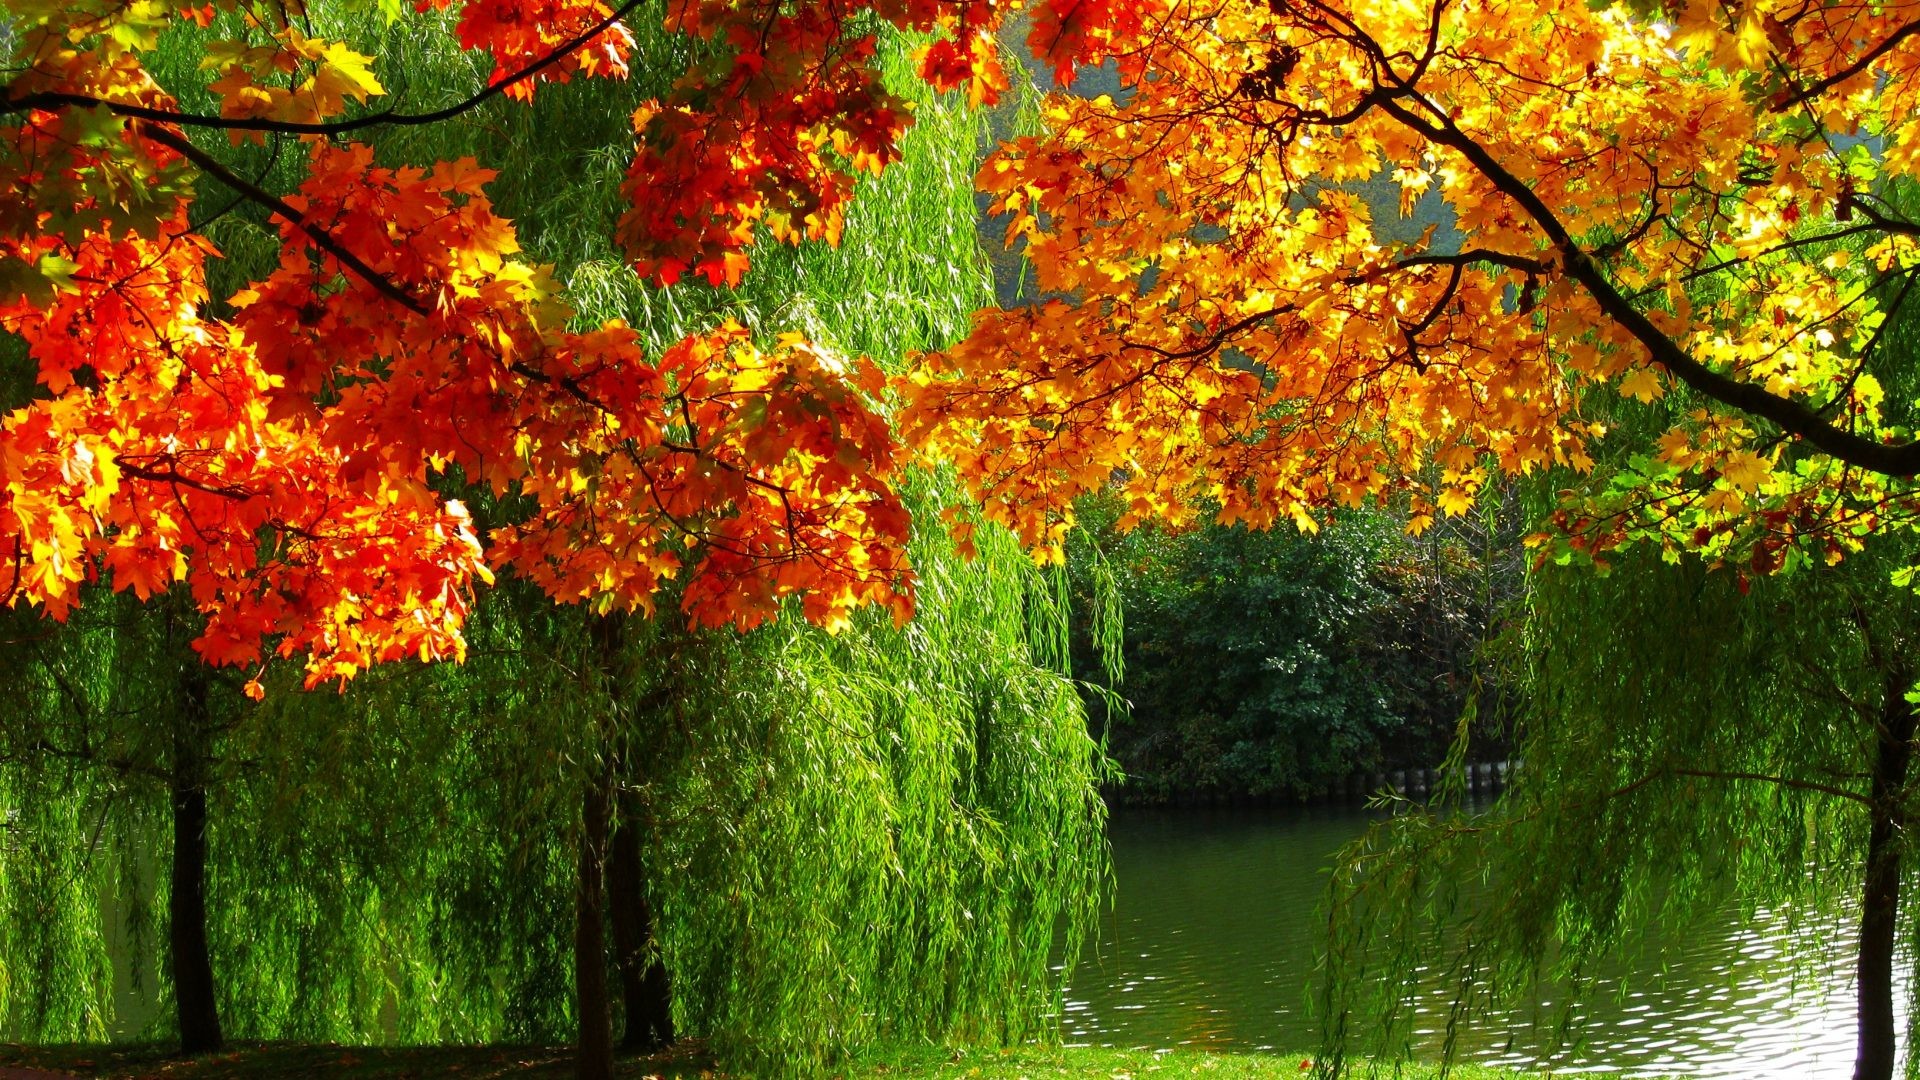 1920x1080 ... Weeping Willow Tree. Autumn Leaves Wallpaper